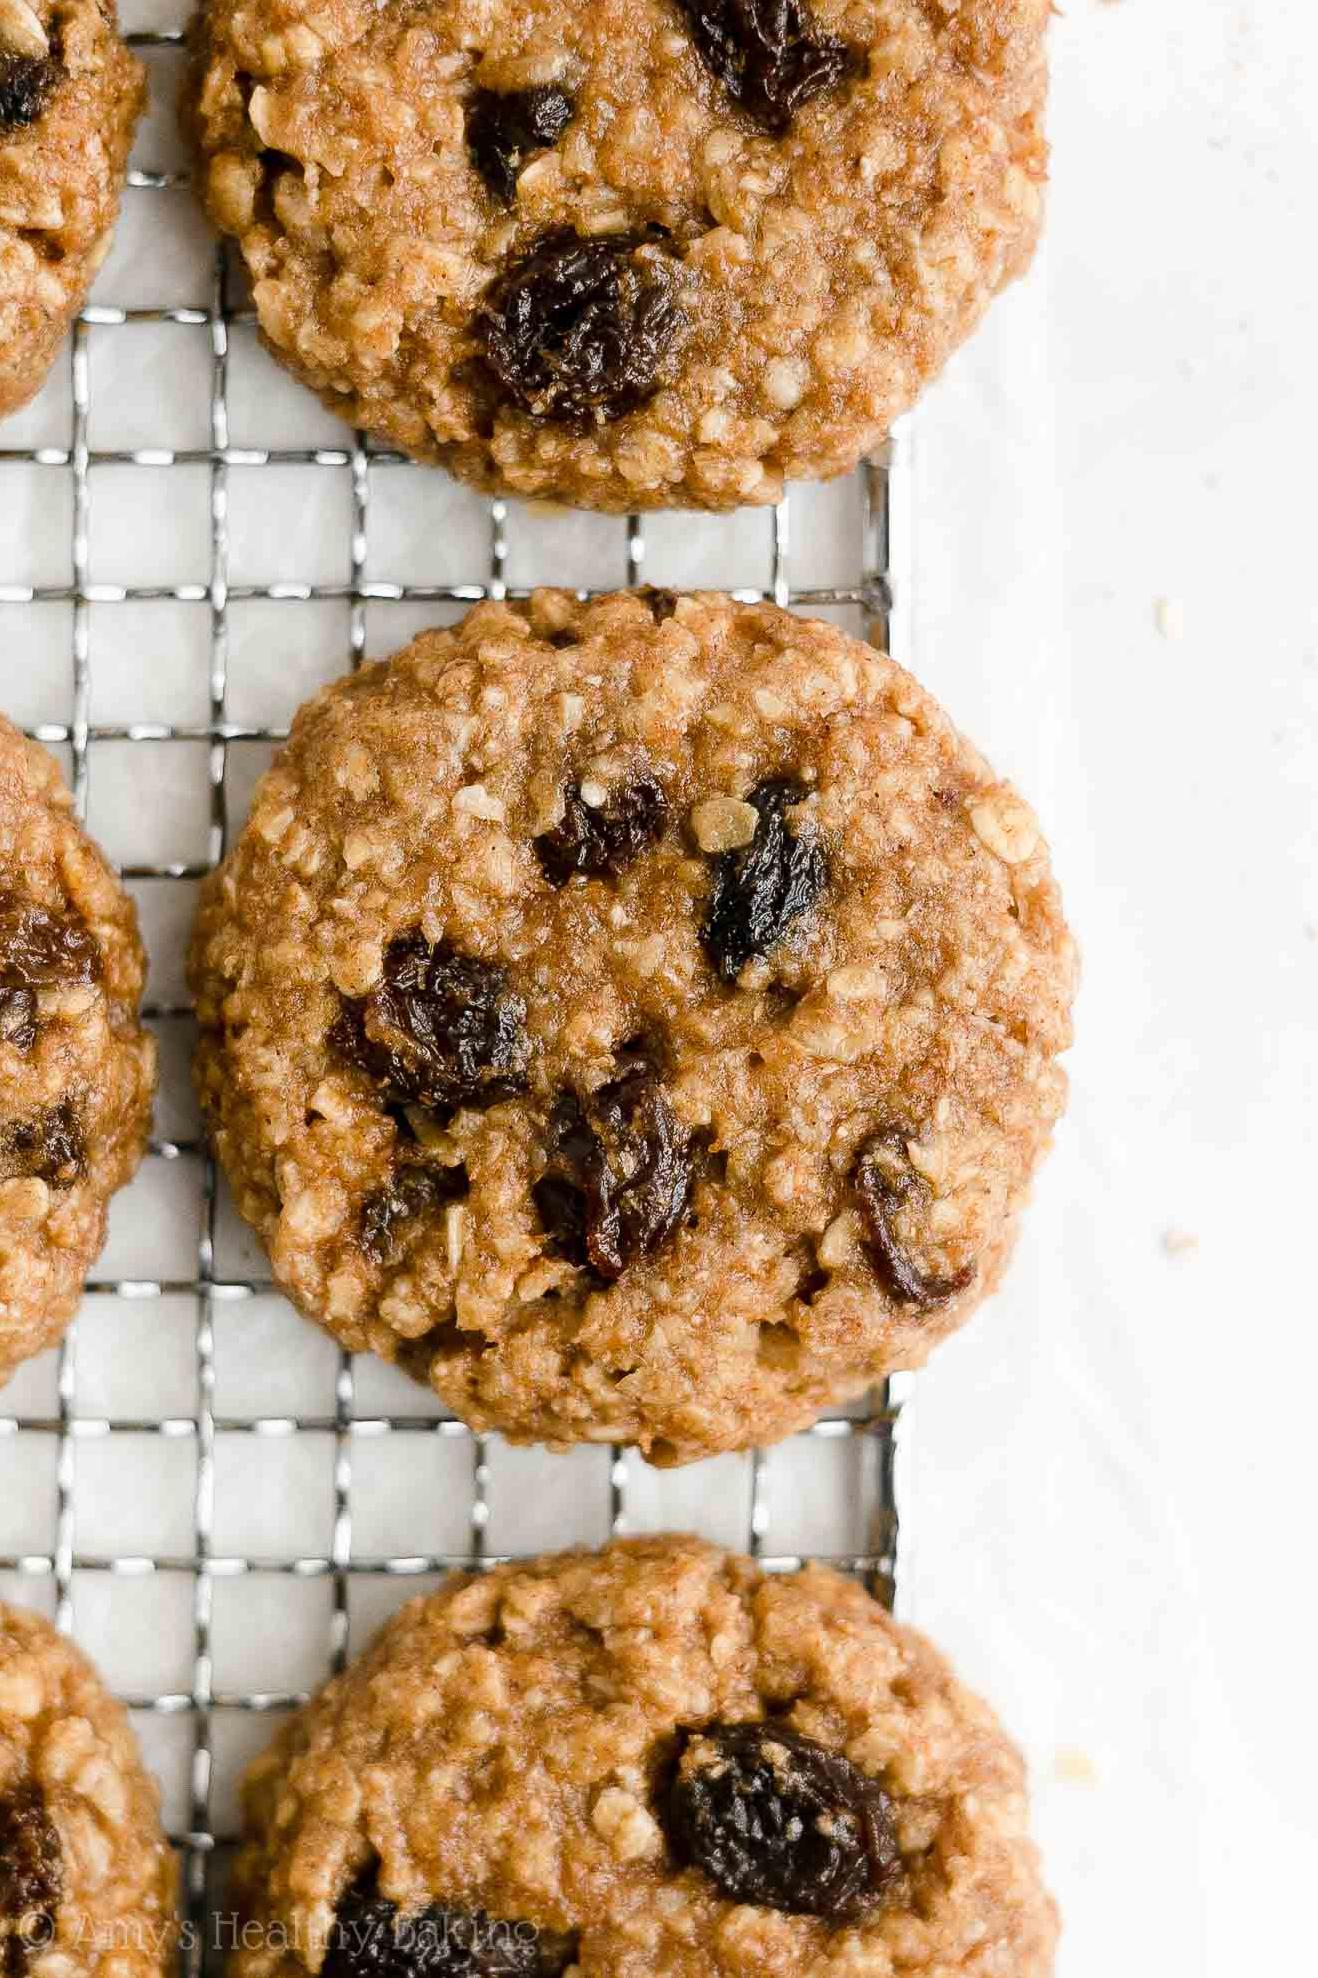  You won’t even have to heat up the oven for these cookies, and they'll still come out delicious.